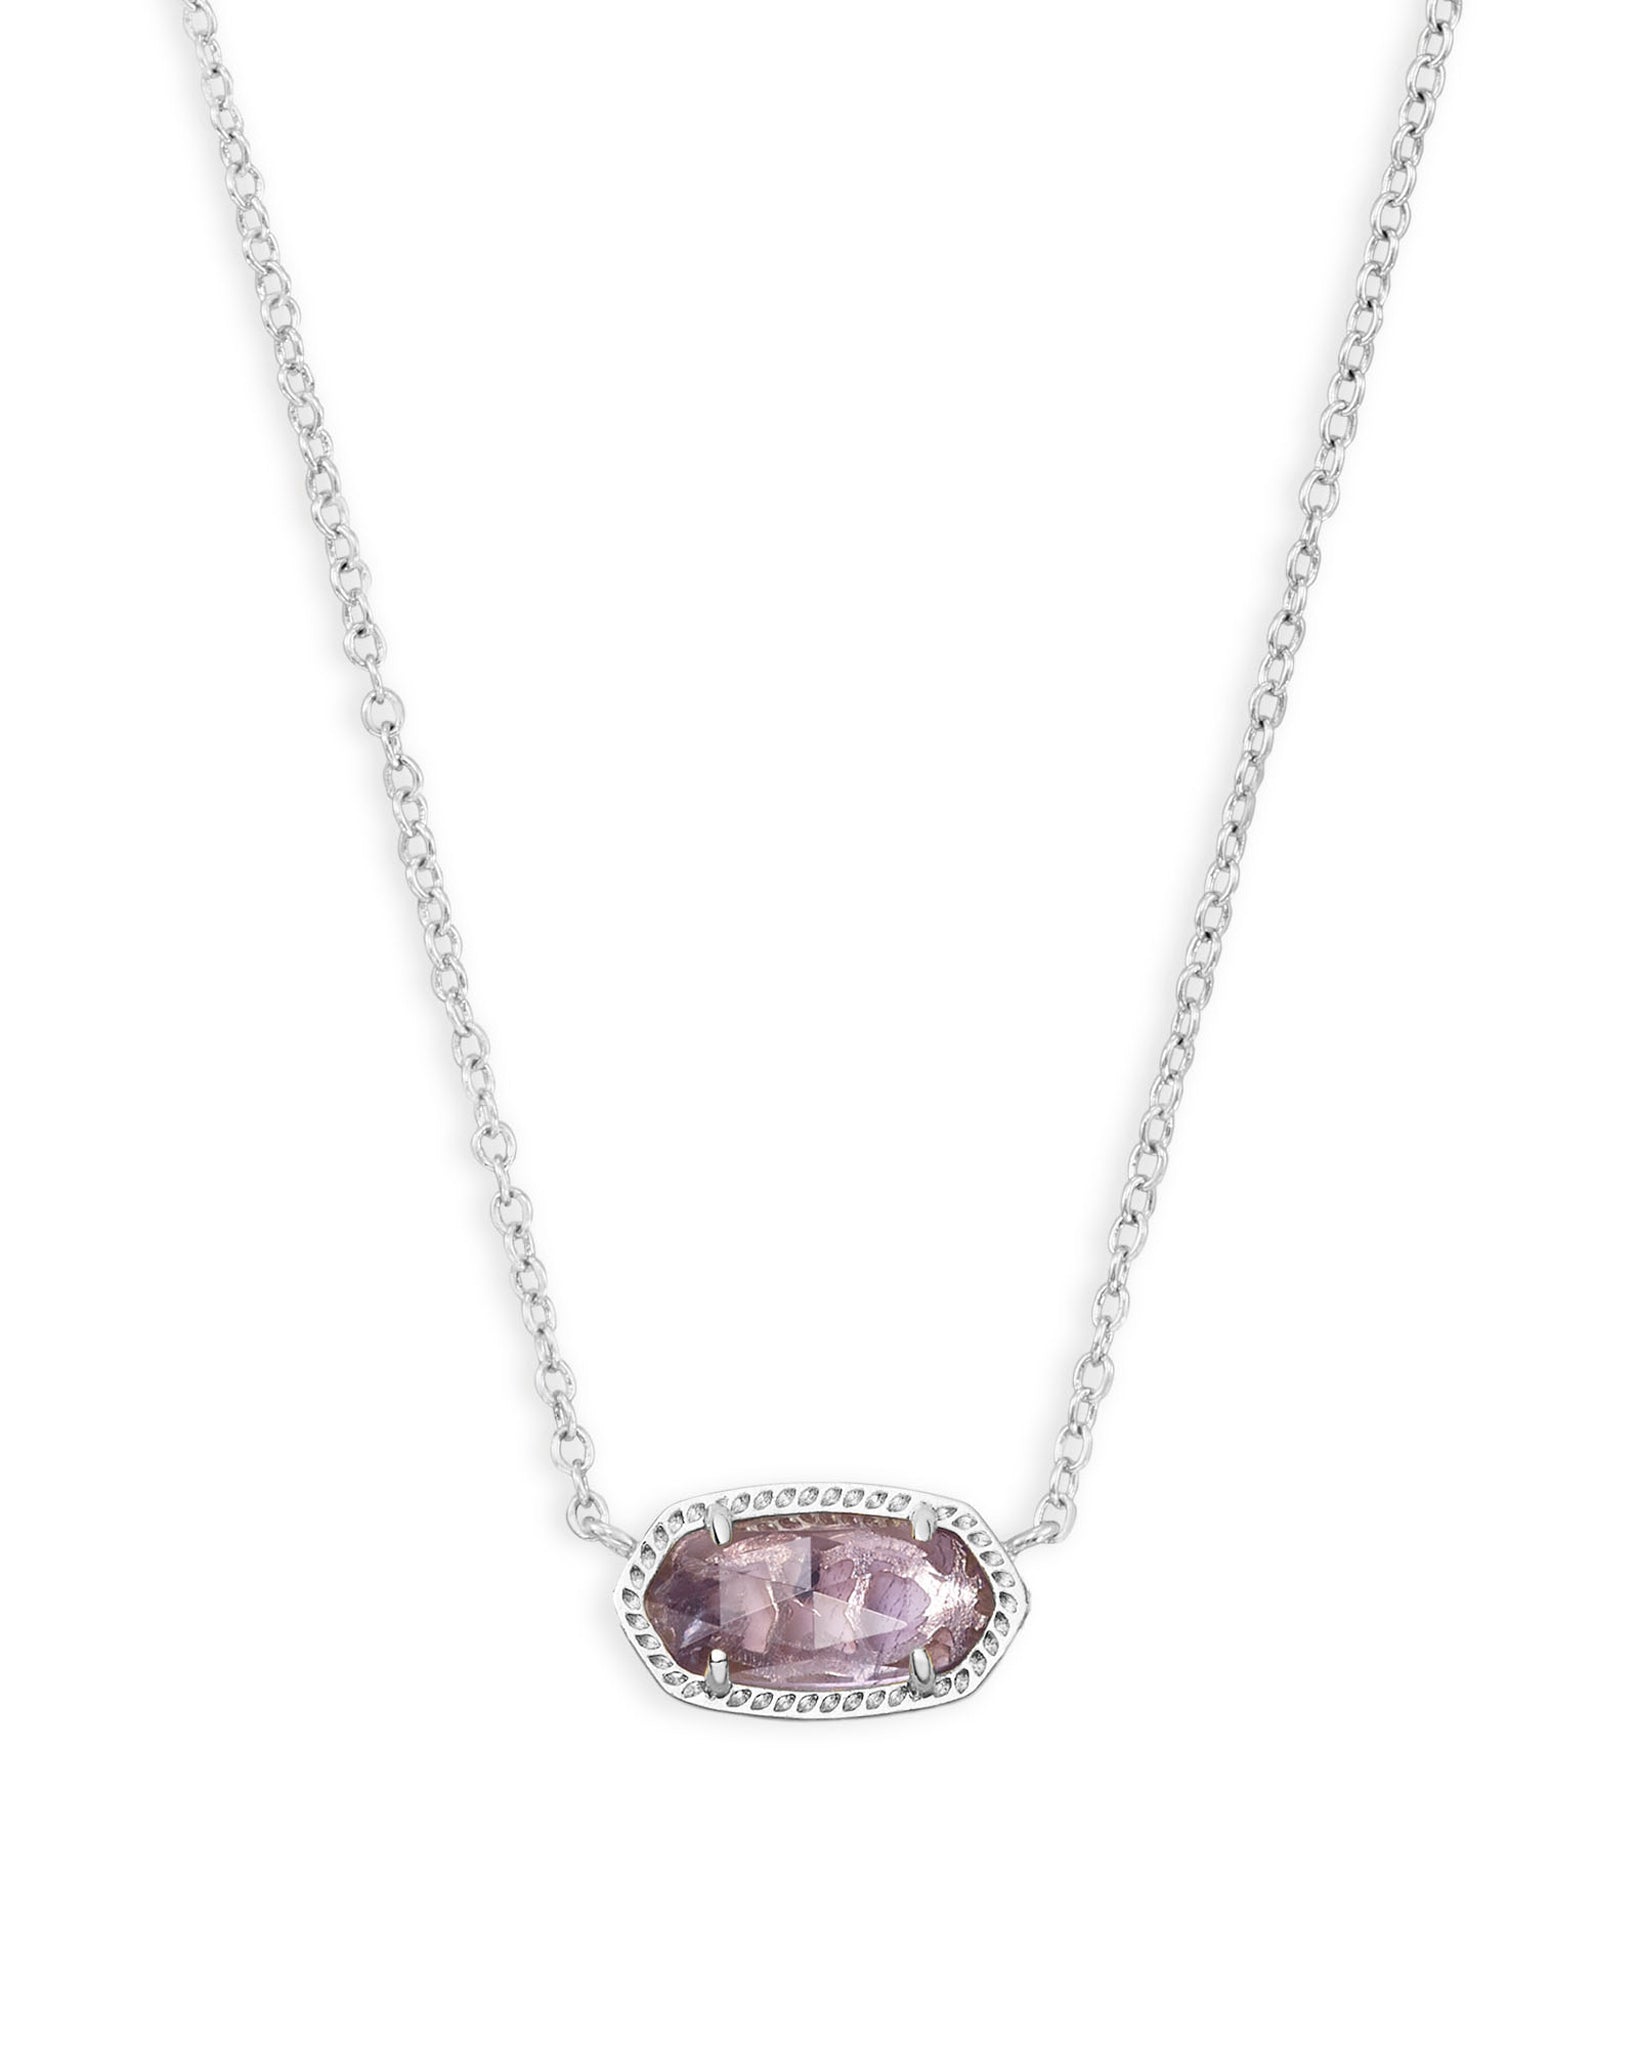 Kendra Scott Elisa Oval Pendant Necklace in Amethyst and Rhodium Plated